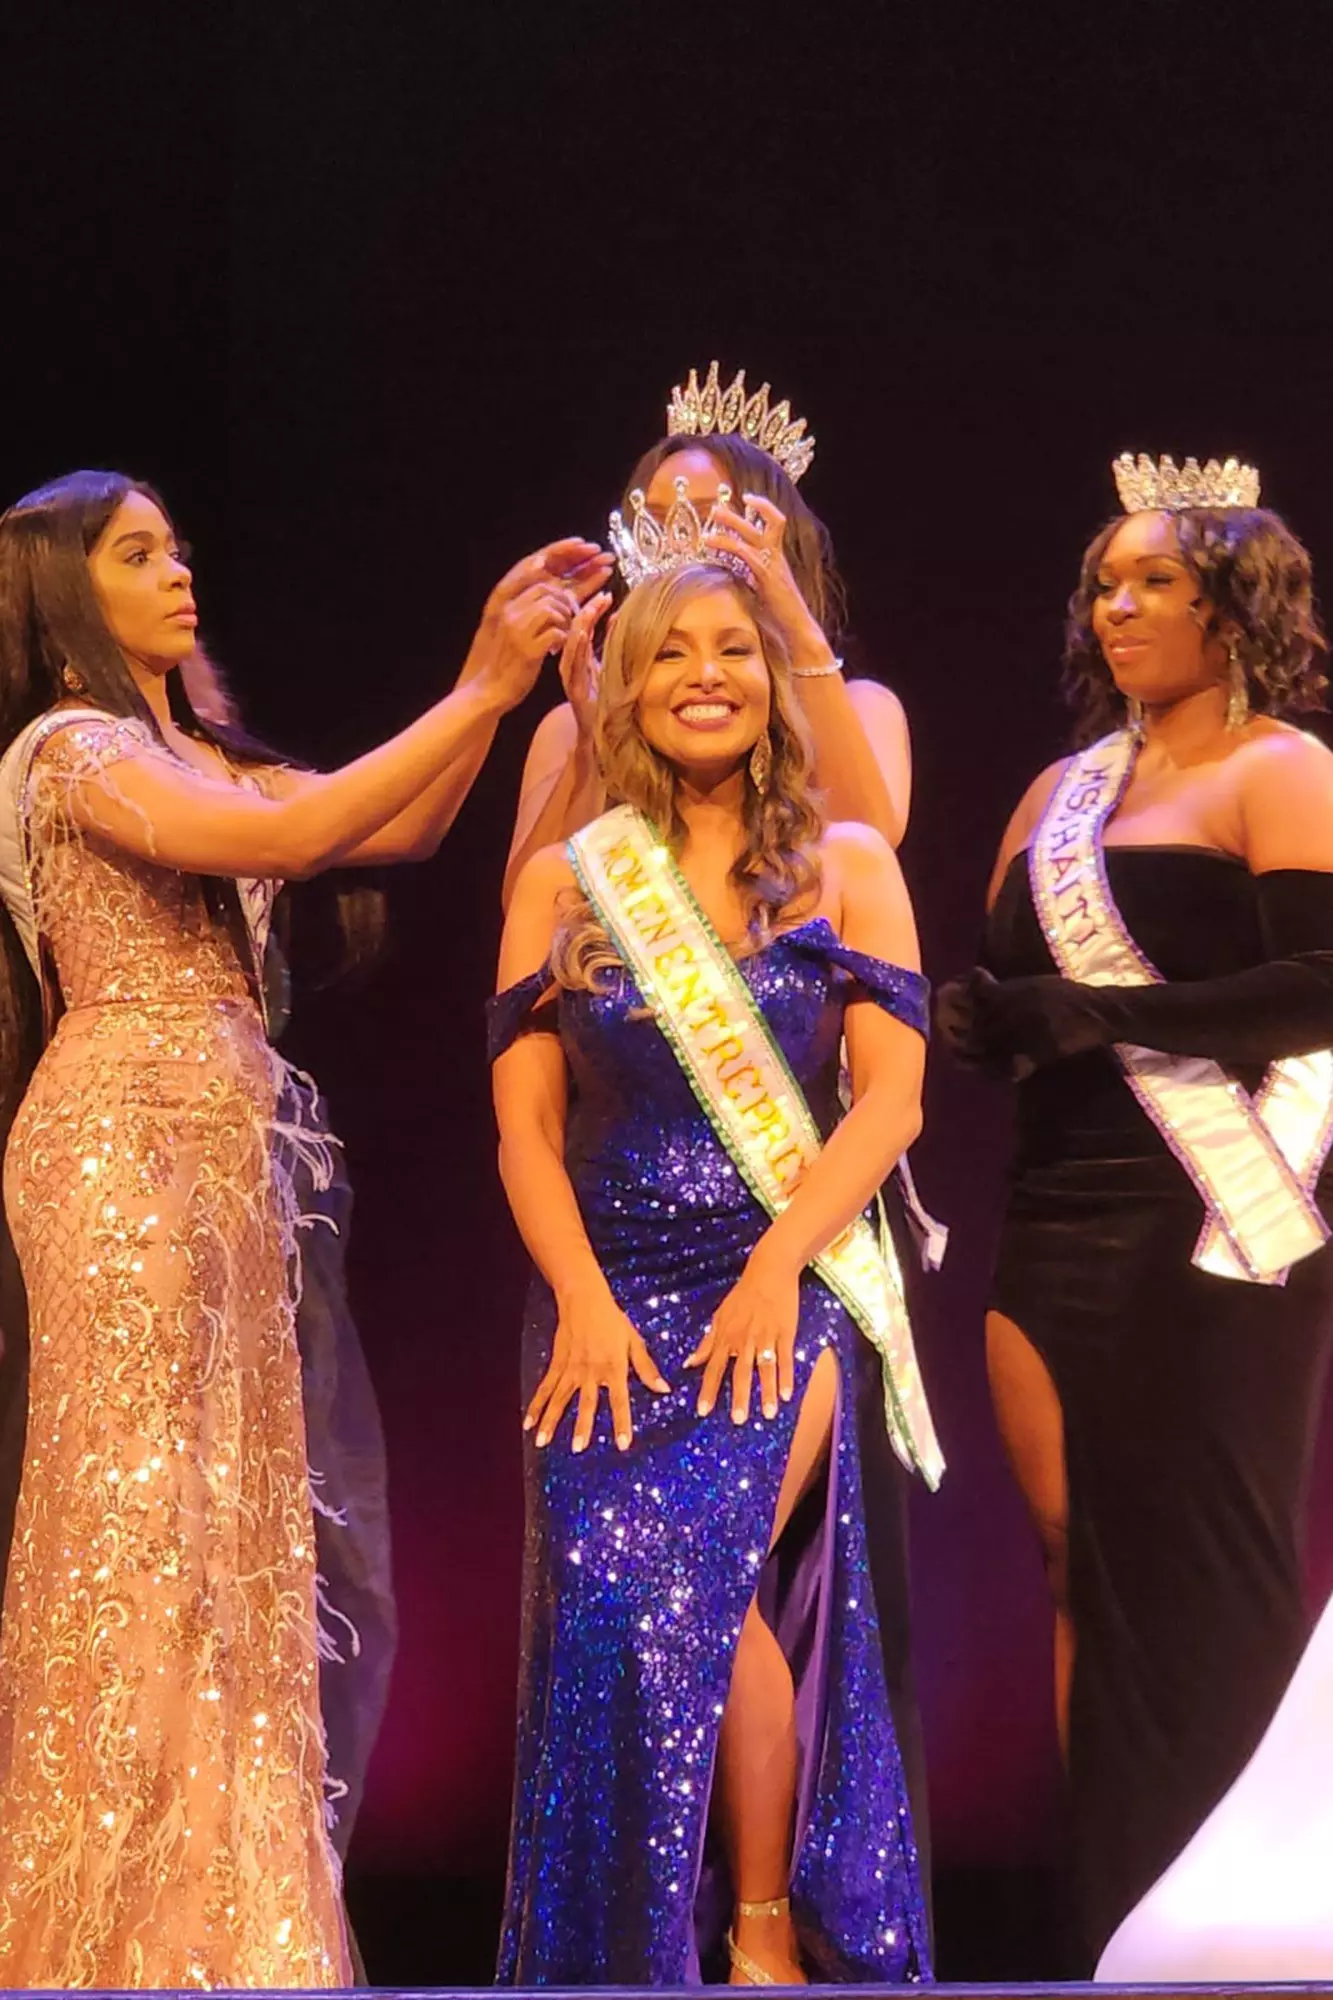 April 3, 2023 – Simona Lazinsk achieved another goal set during her breast cancer battle – entering a beauty pageant. Not only did she enter, but she won Mrs. Central Florida International! 